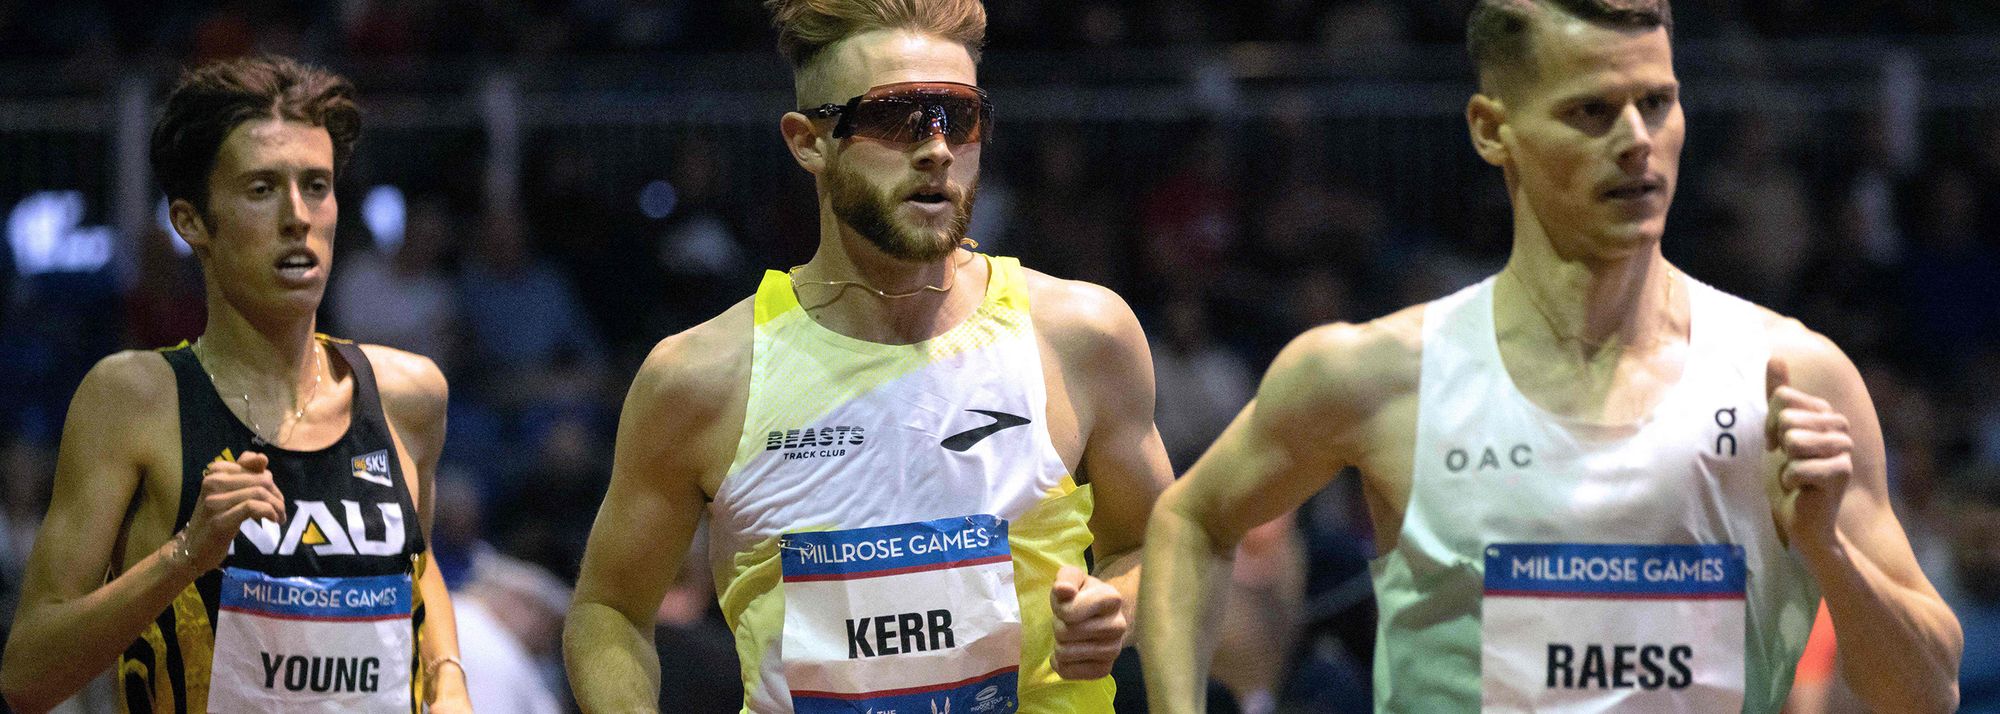 Britain’s world 1500m champion Josh Kerr will headline the men’s two mile field at the World Athletics Indoor Tour Gold event